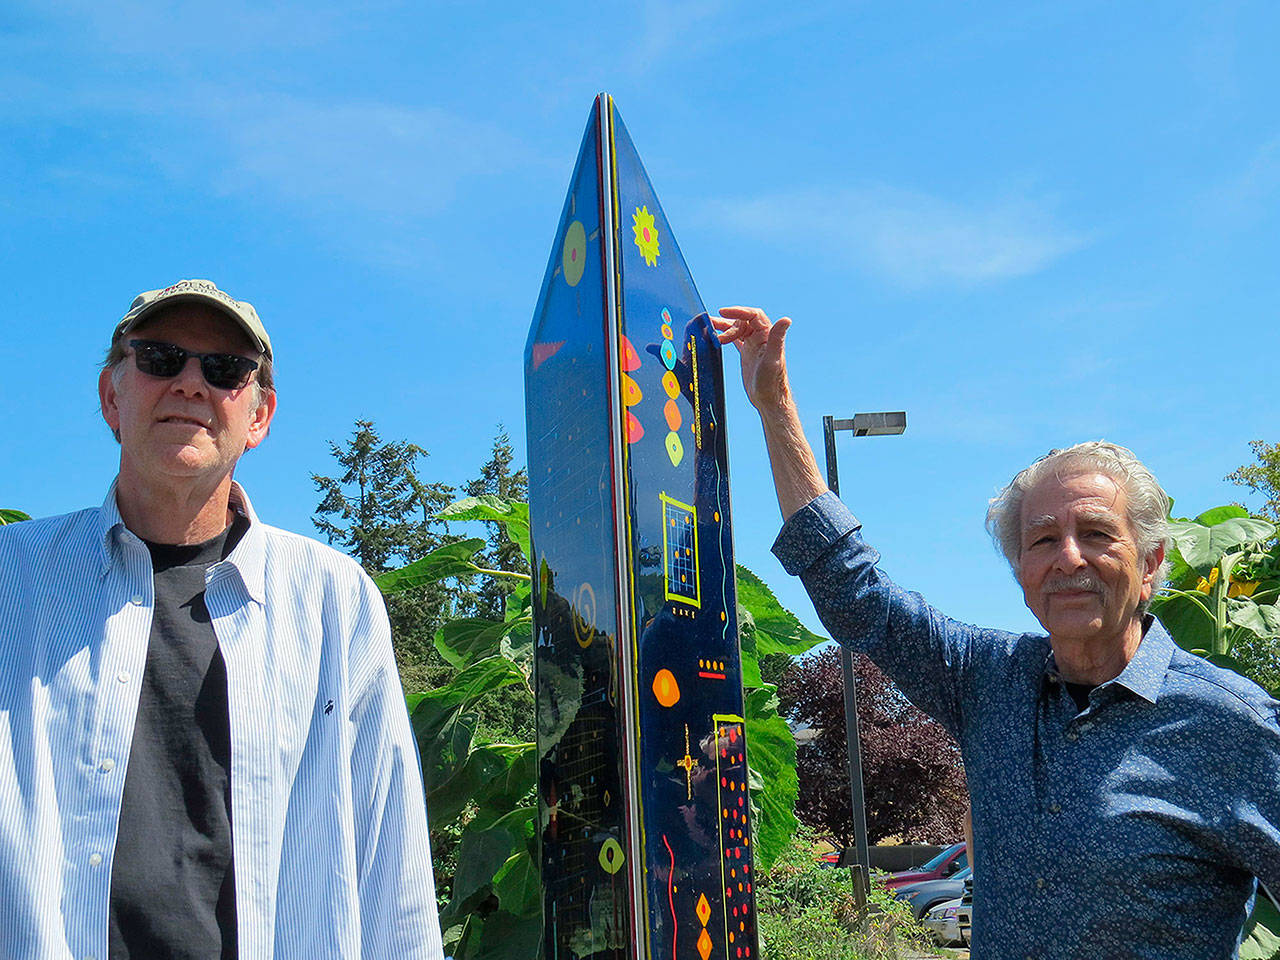 Burt Beusch photo — Artist Dale Reiger (left) and Langley Arts Commission Chairman Frank Rose stand next to Reiger’s new sculpture at a ceremony on Saturday at Clyde Alley.